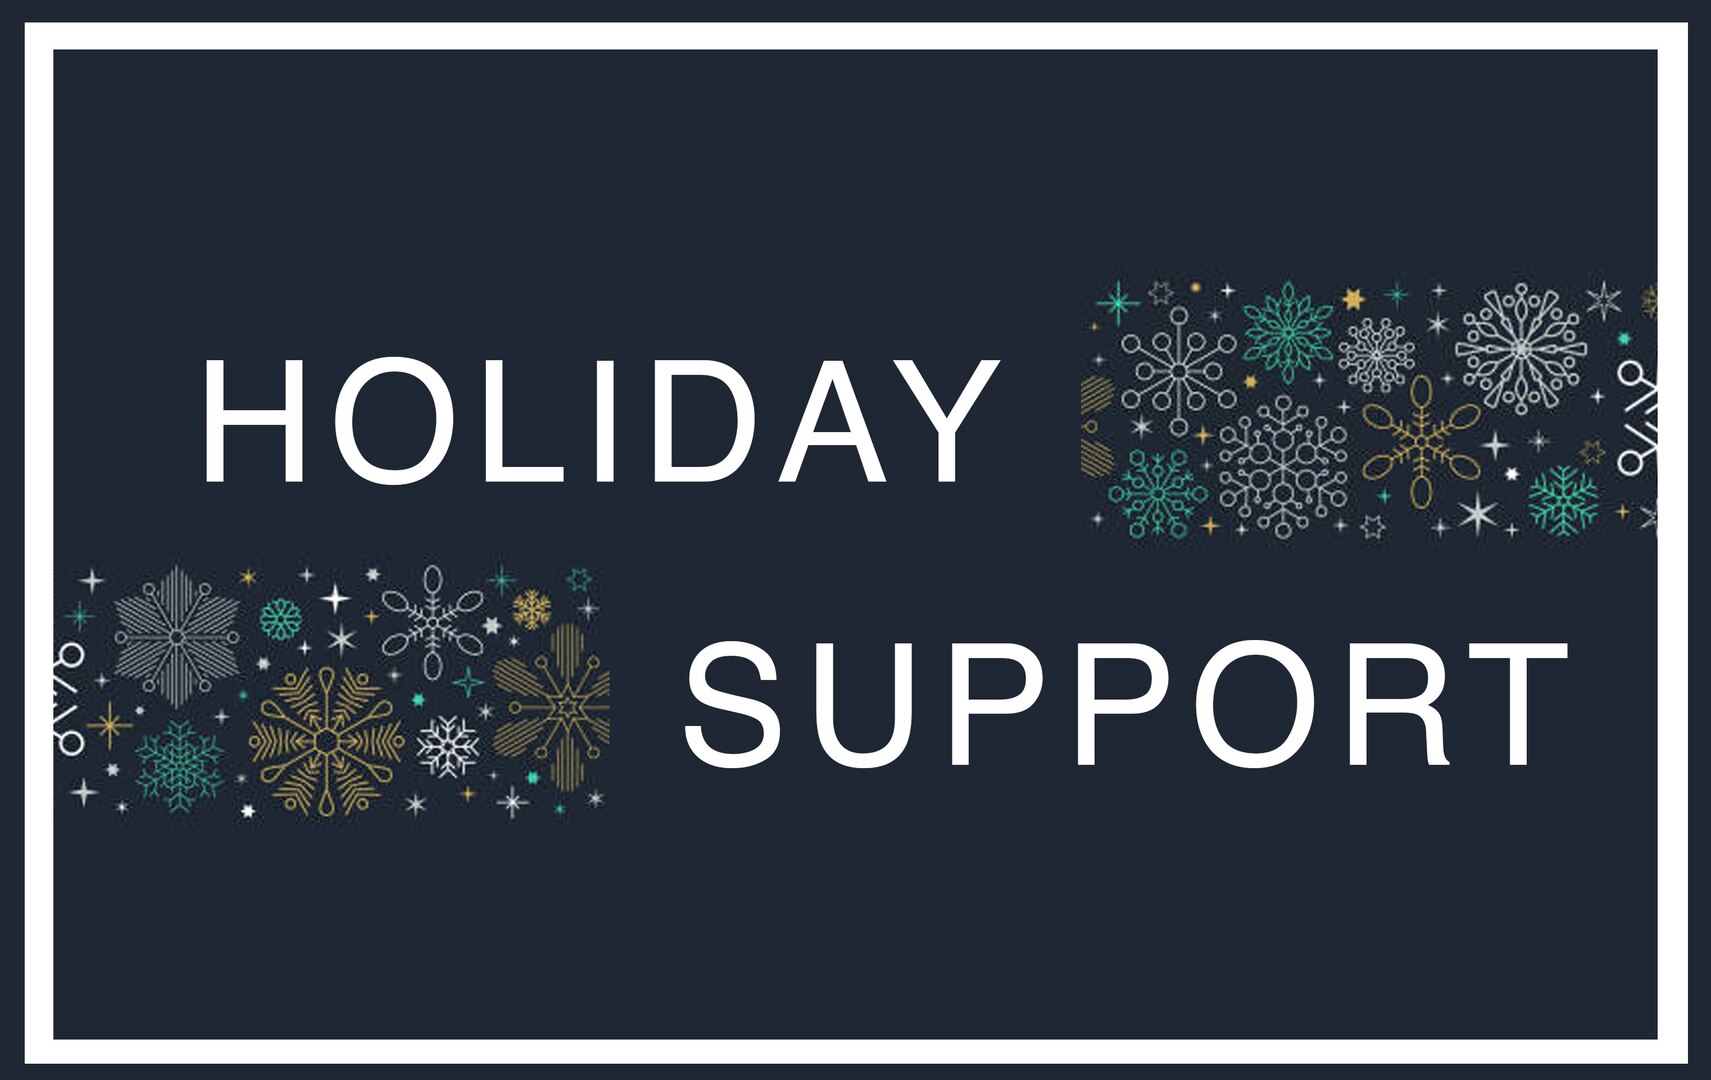 If you find yourself or a loved one having trouble this holiday season, support is always available. CG SUPRT offers a variety of services, including free and confidential supportive counseling, and is available 24/7/365.